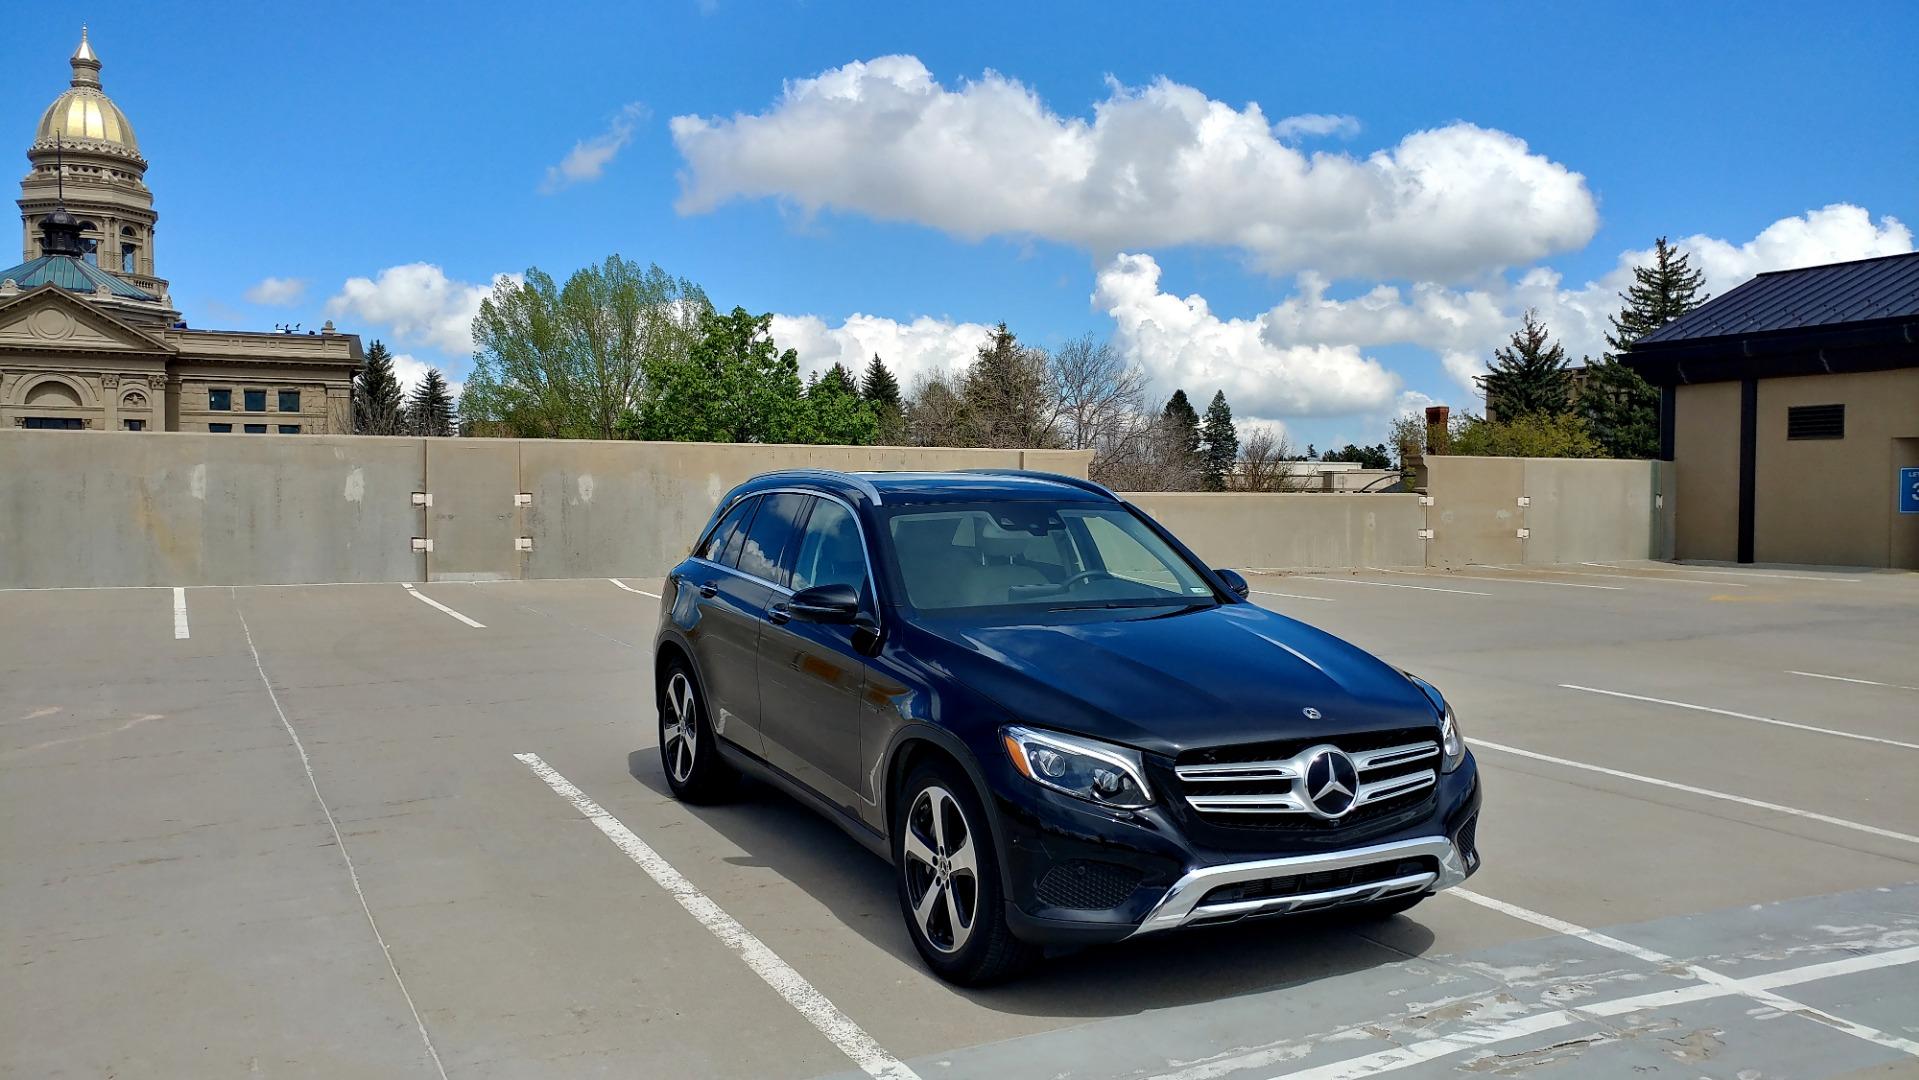 Review: 2019 Mercedes-Benz GLC 350e is a plugged-in luxury crossover